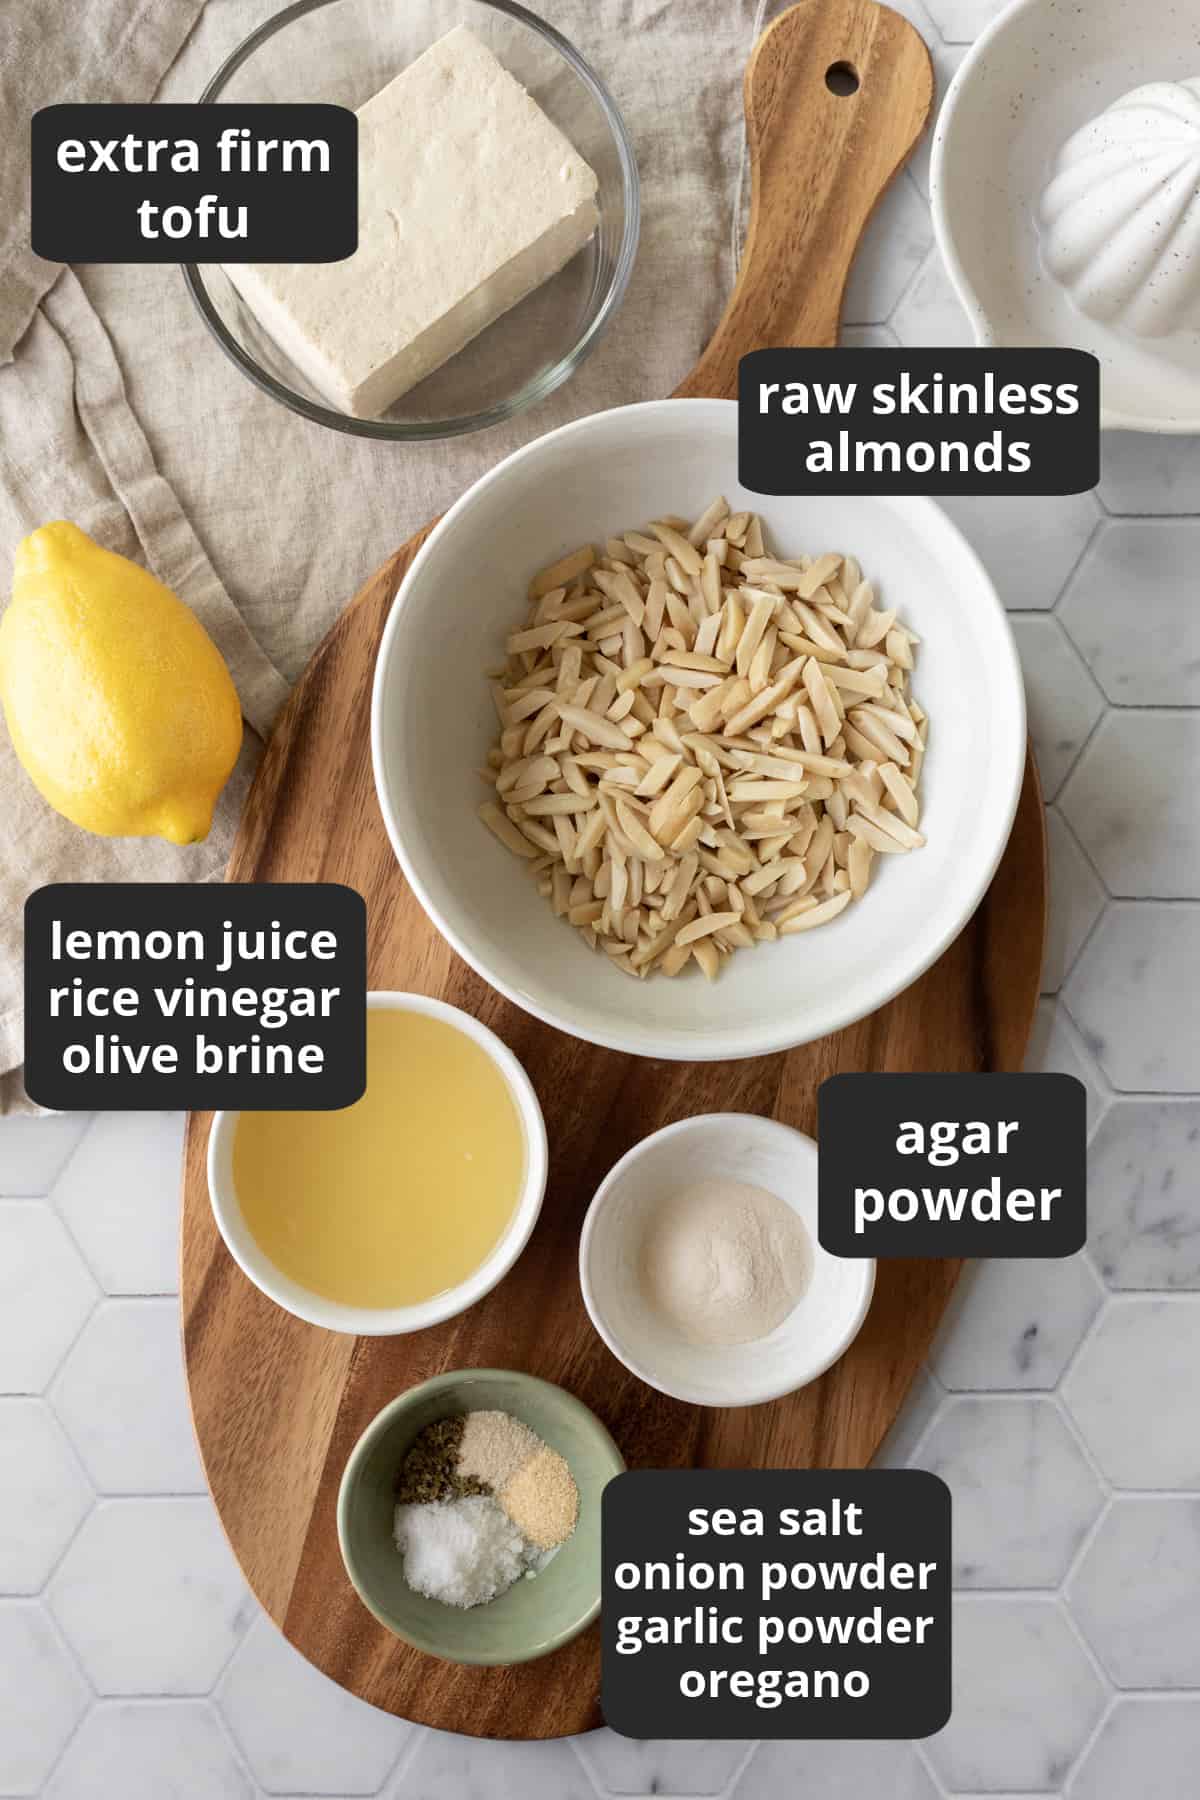 labeled photo showing 10 ingredients needed to make the cheese.